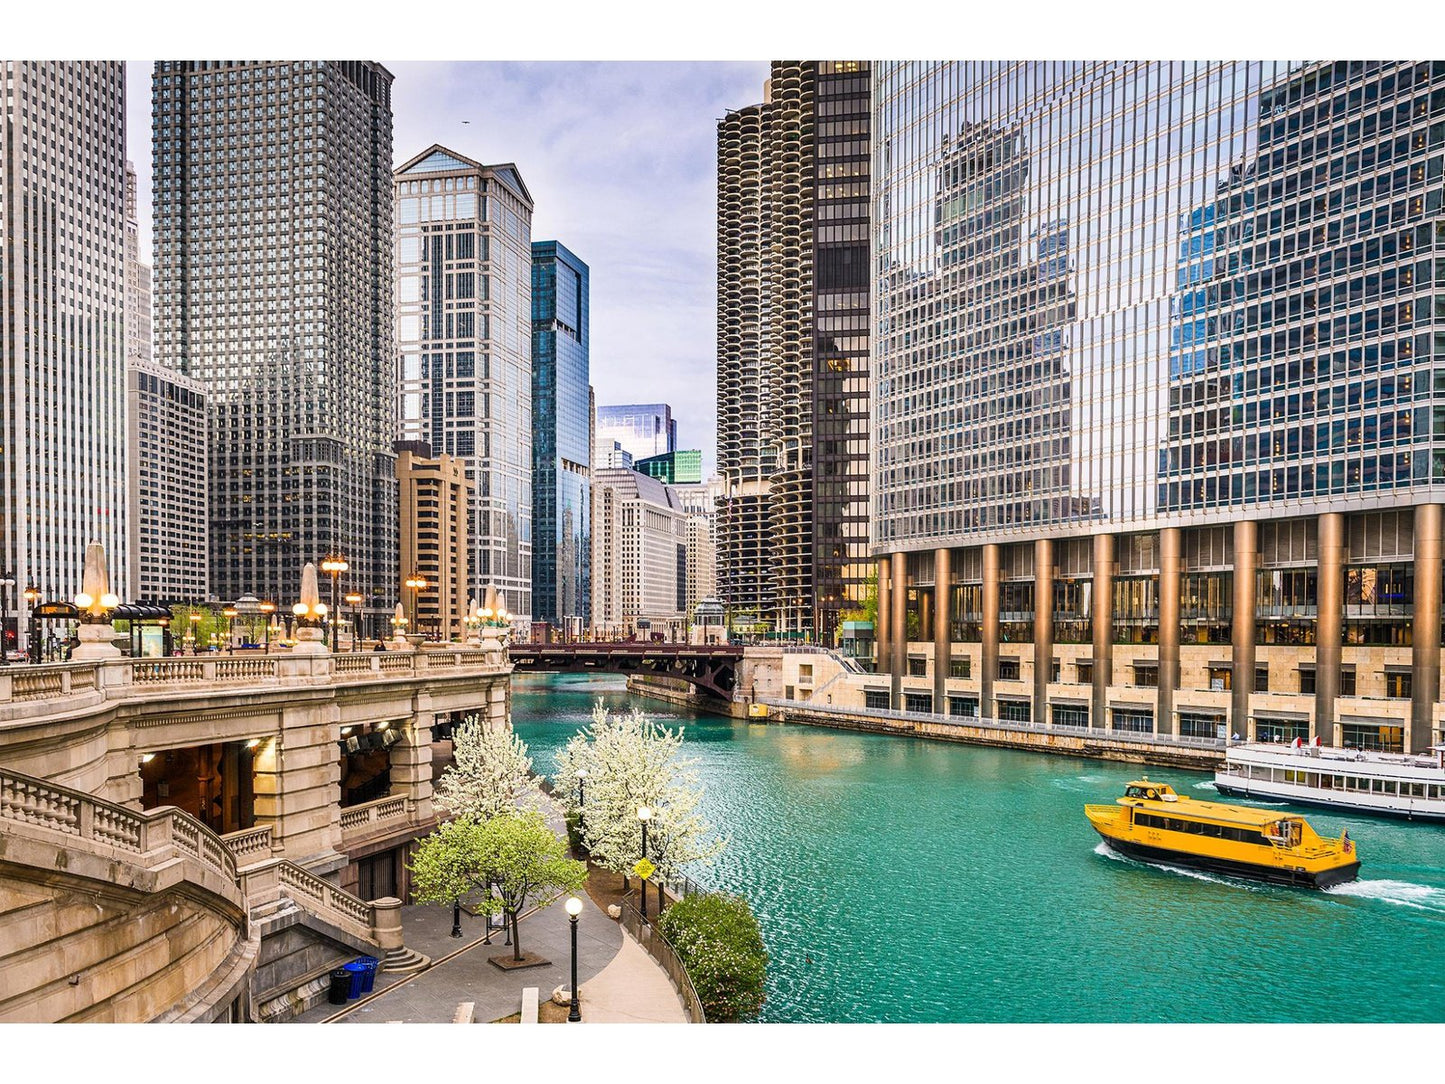 Chicago River Tempered Glass w / Foil Wall Art